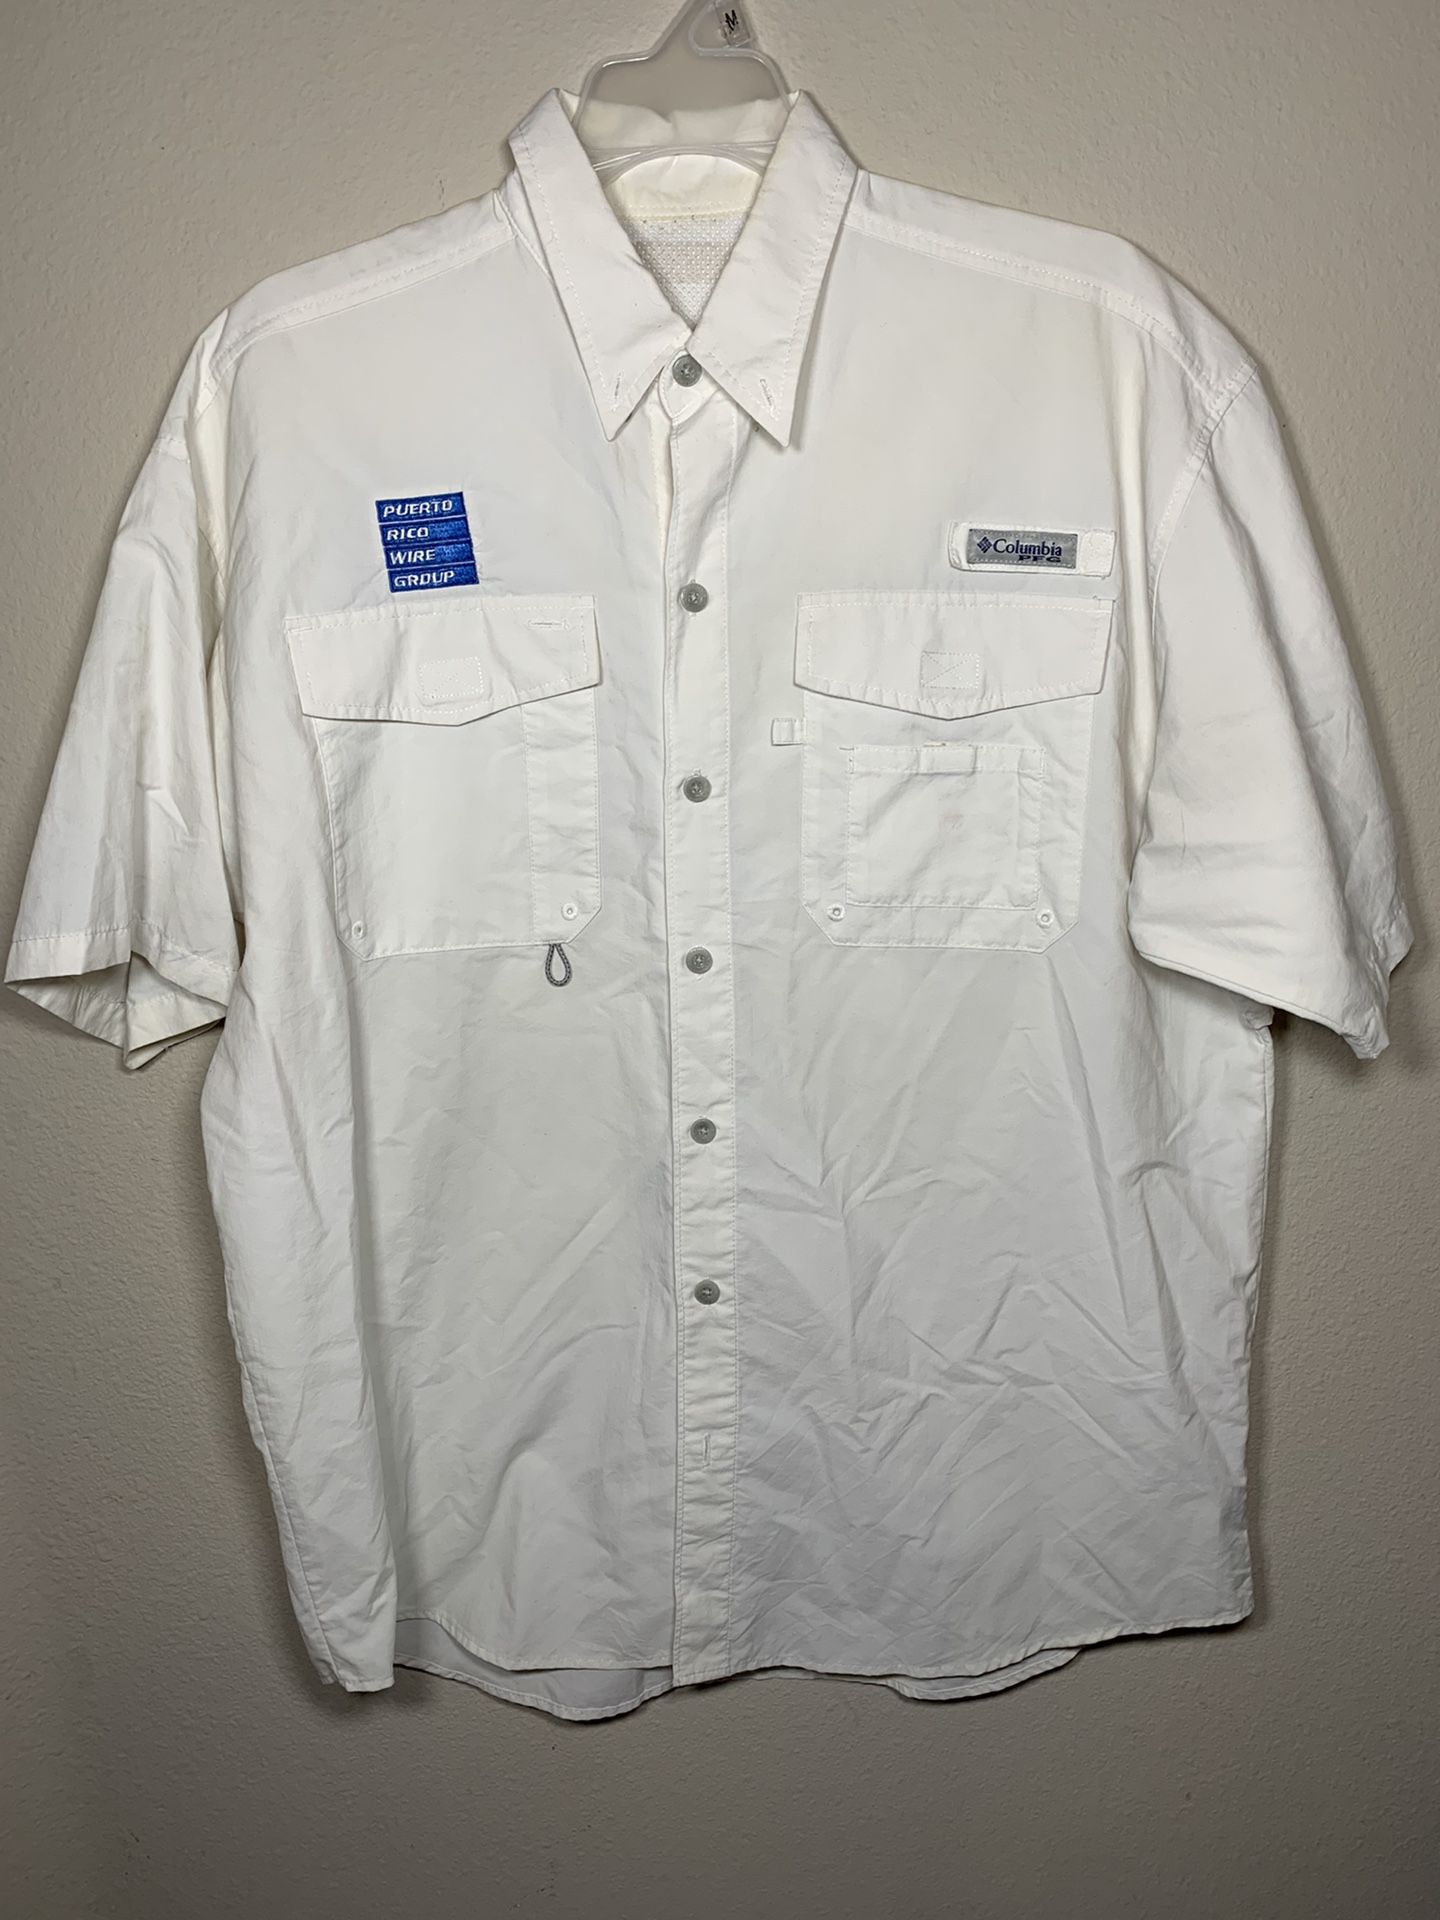 Columbia PFG Large Button Down Fishing Shirt For Men, Short Sleeve,  Ventilated for Sale in Tampa, FL - OfferUp